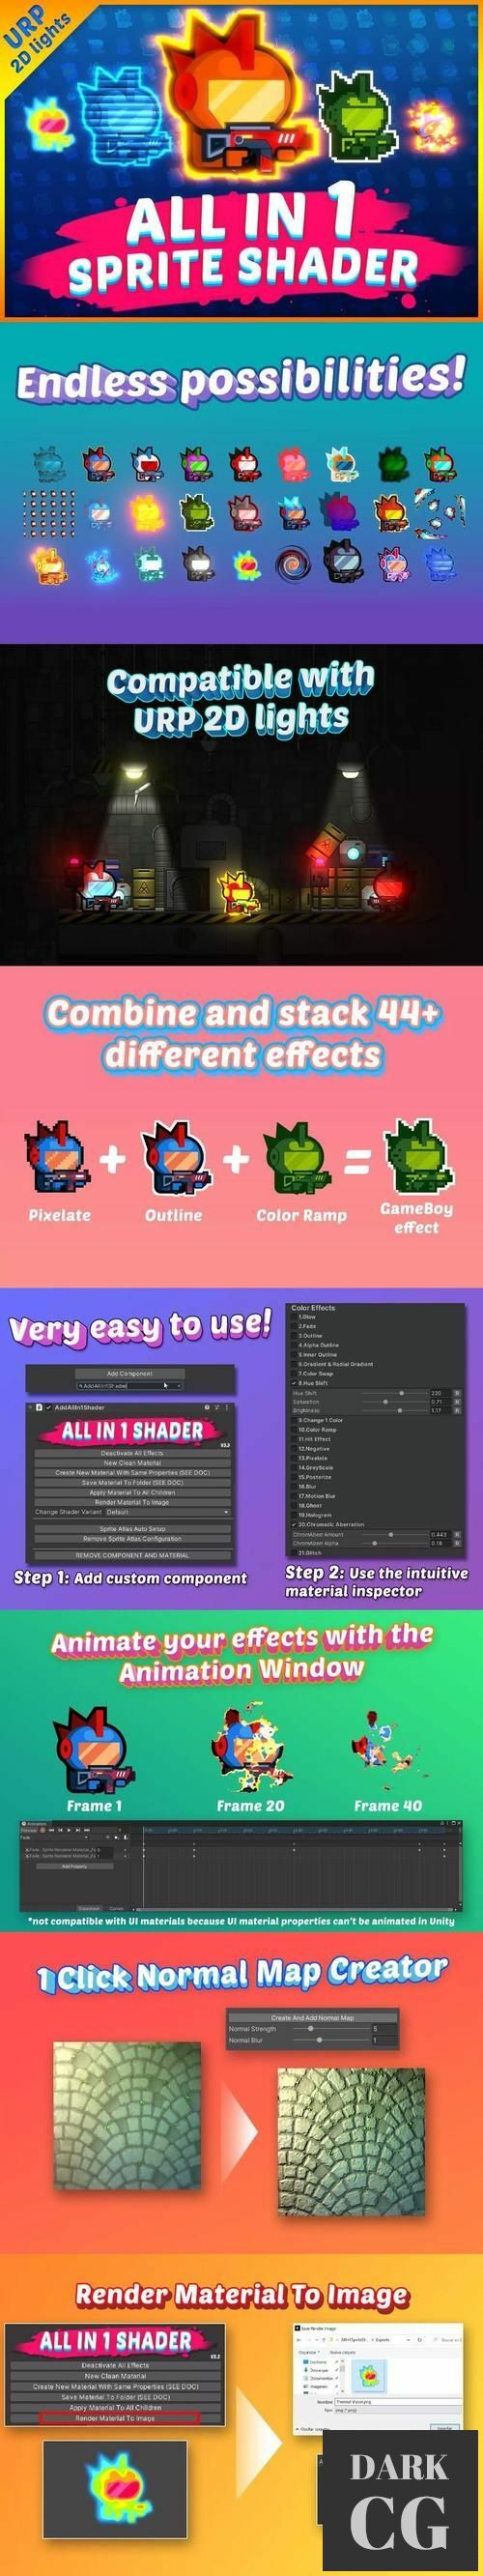 Unity Asset Store – All In 1 Sprite Shader